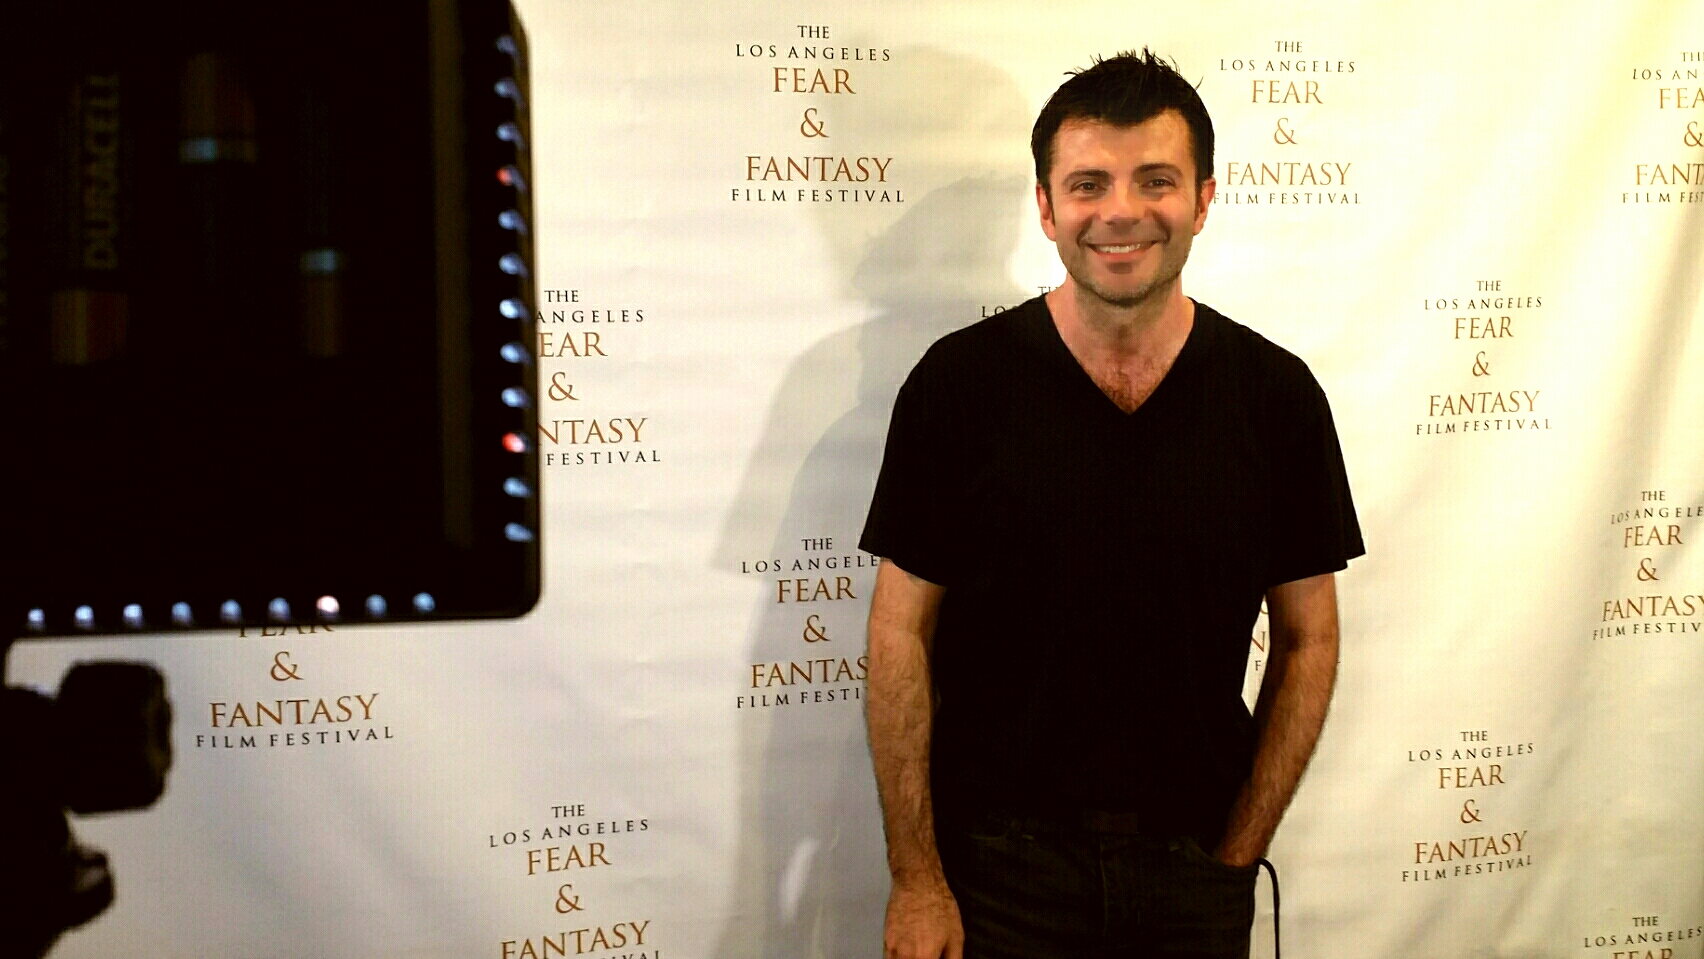 At the Los Angeles Fear and Fantasy Film Festival in competition with Doradus